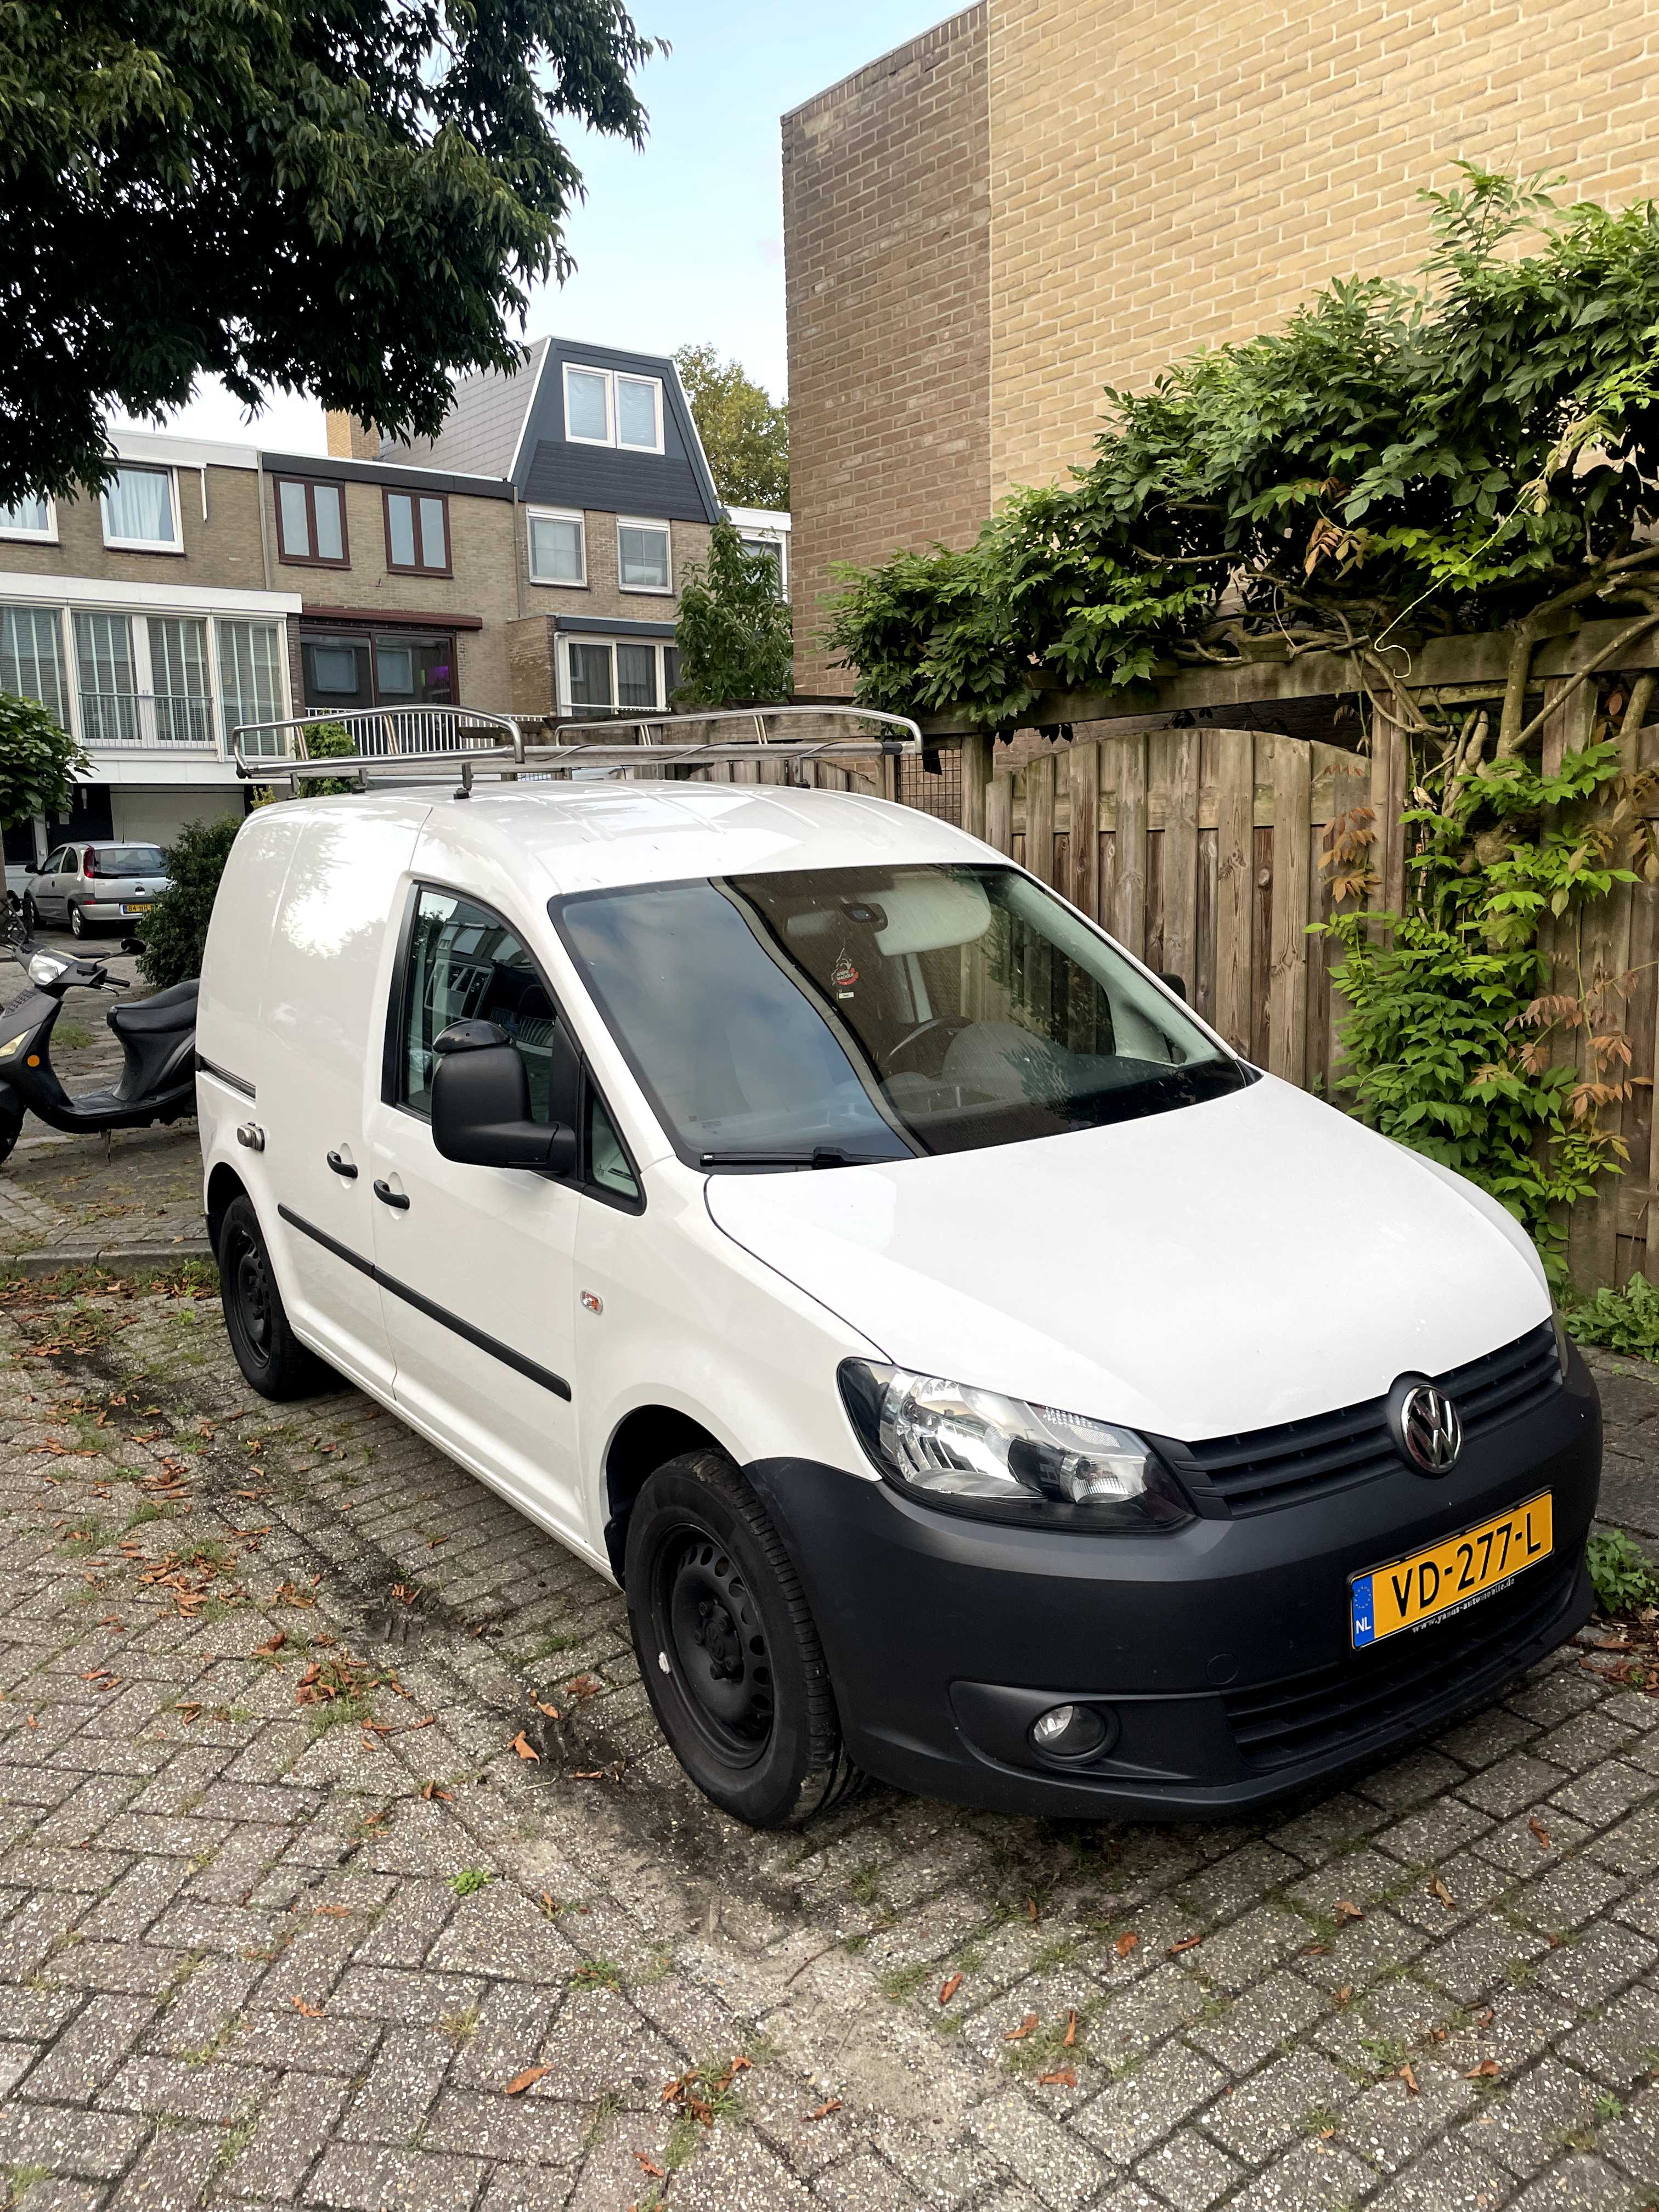 Moving company in Eidhoven | Relocation services by Moovick